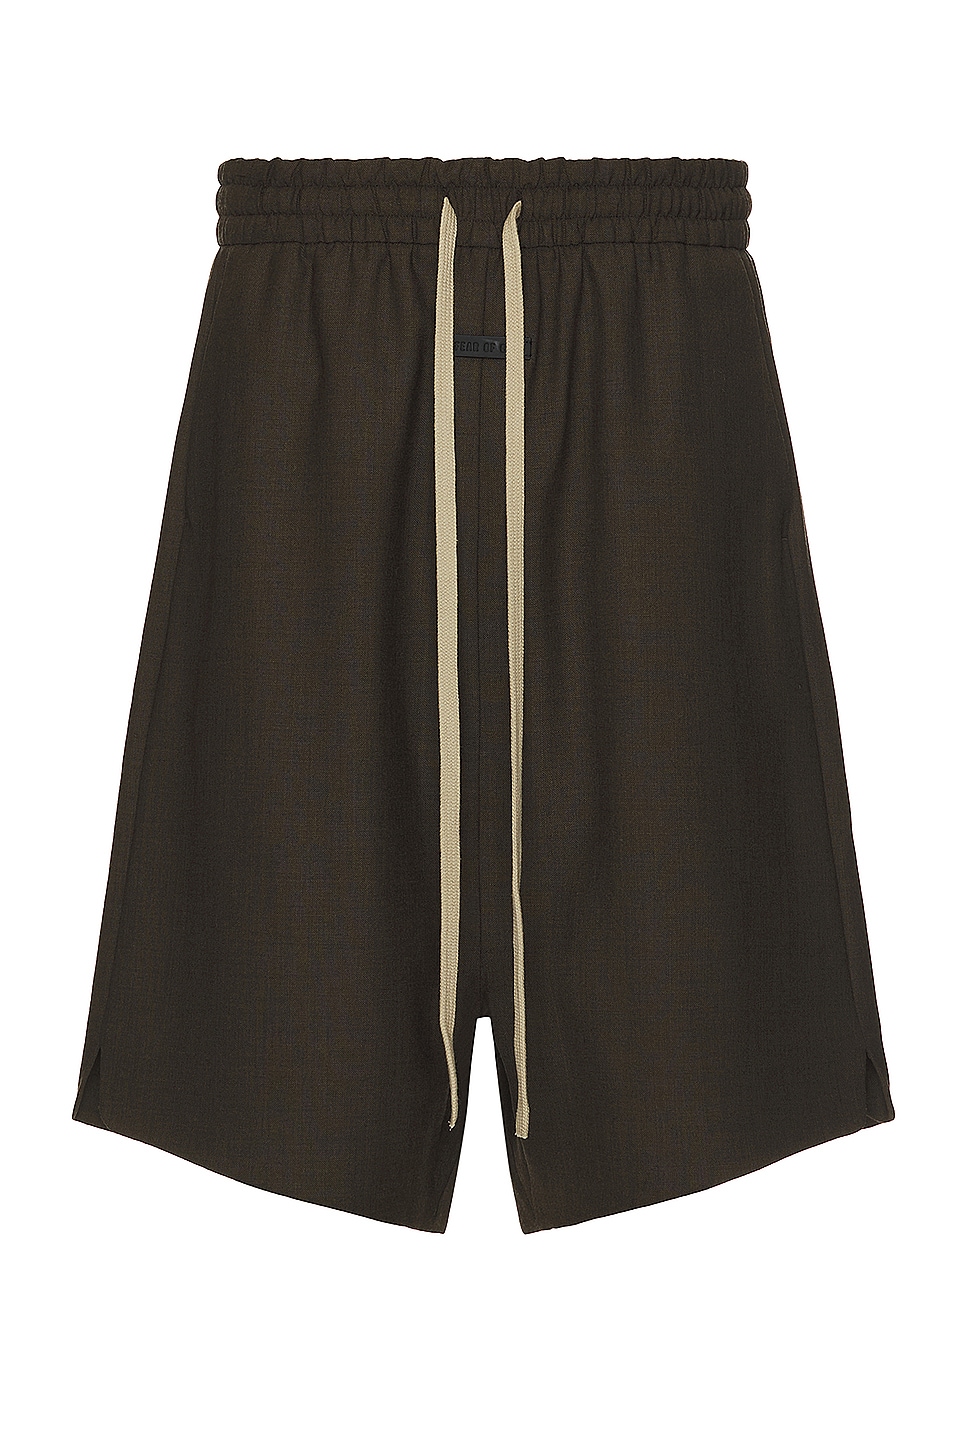 Image 1 of Fear of God Wool Canvas Relaxed Short in Mocha